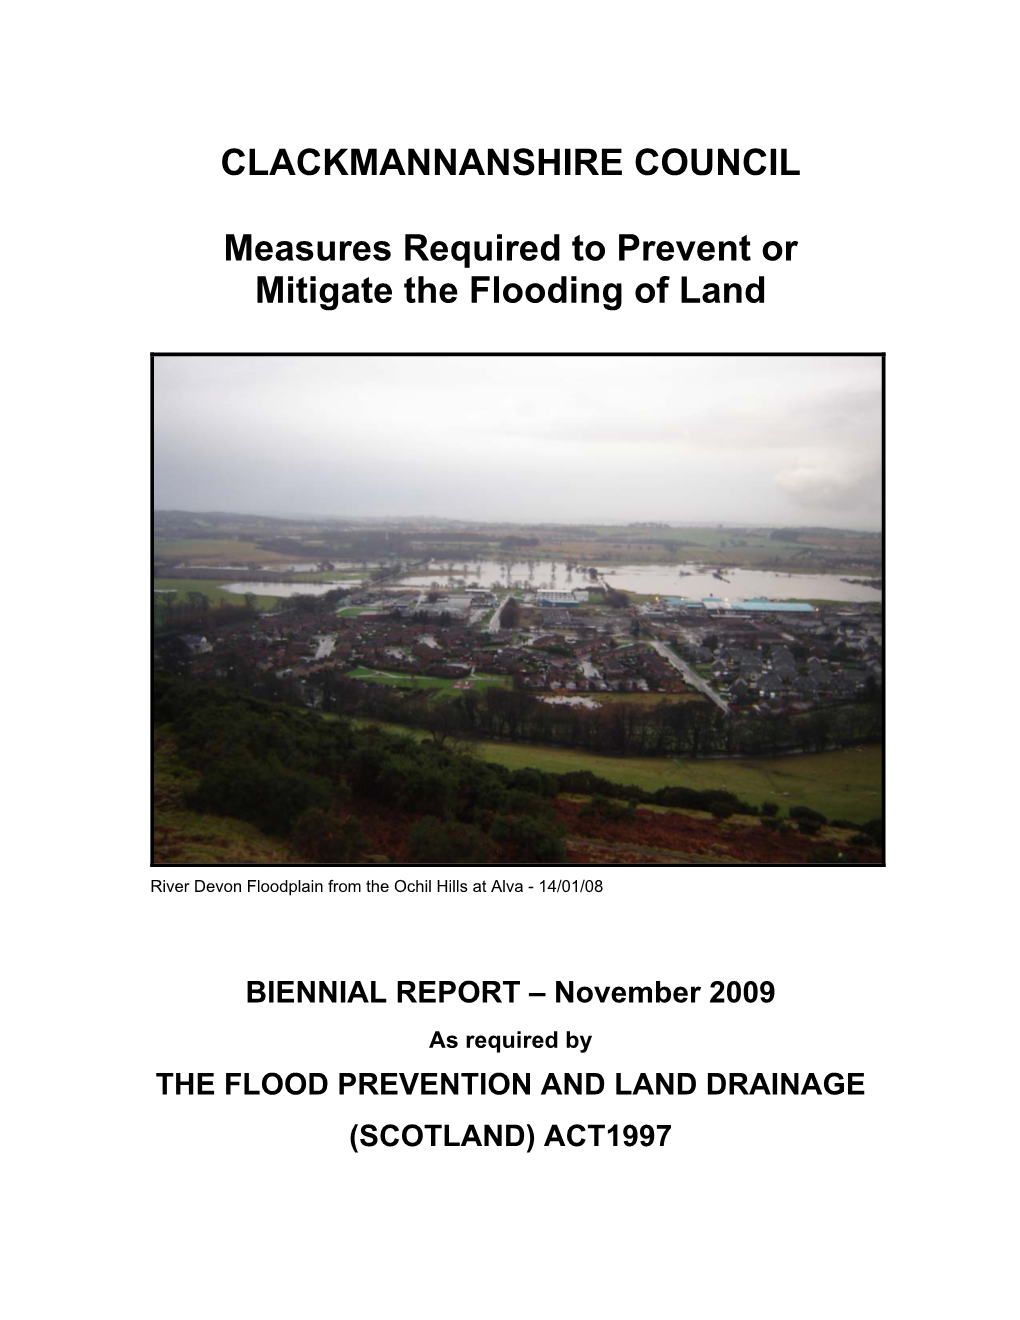 Measures Required to Prevent Or Mitigate the Flooding of Land